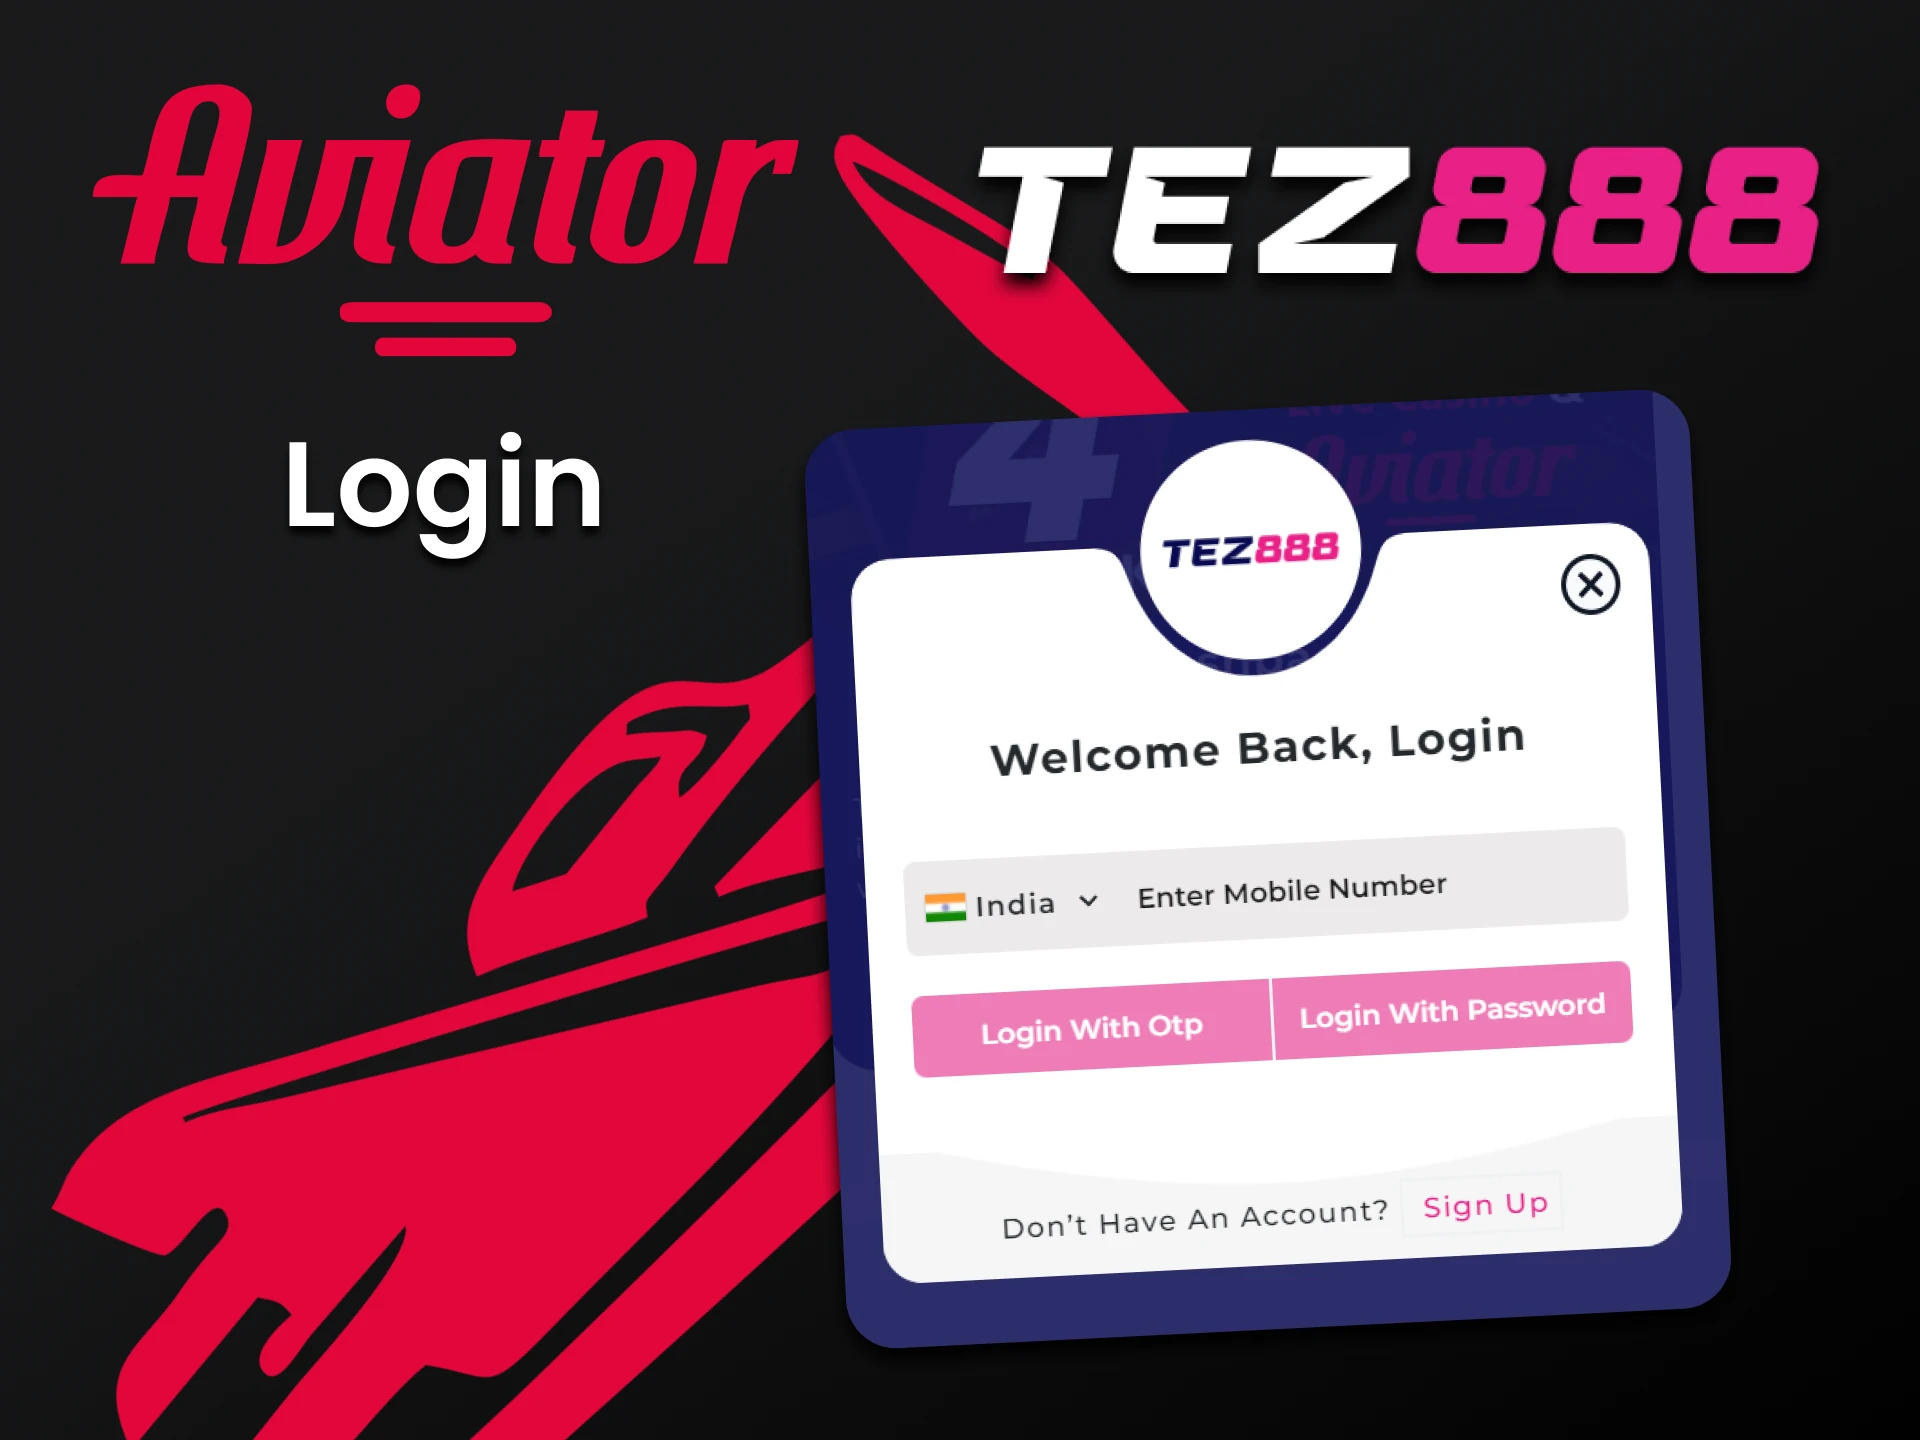 Log in to your existing Tez888 account to play Aviator.